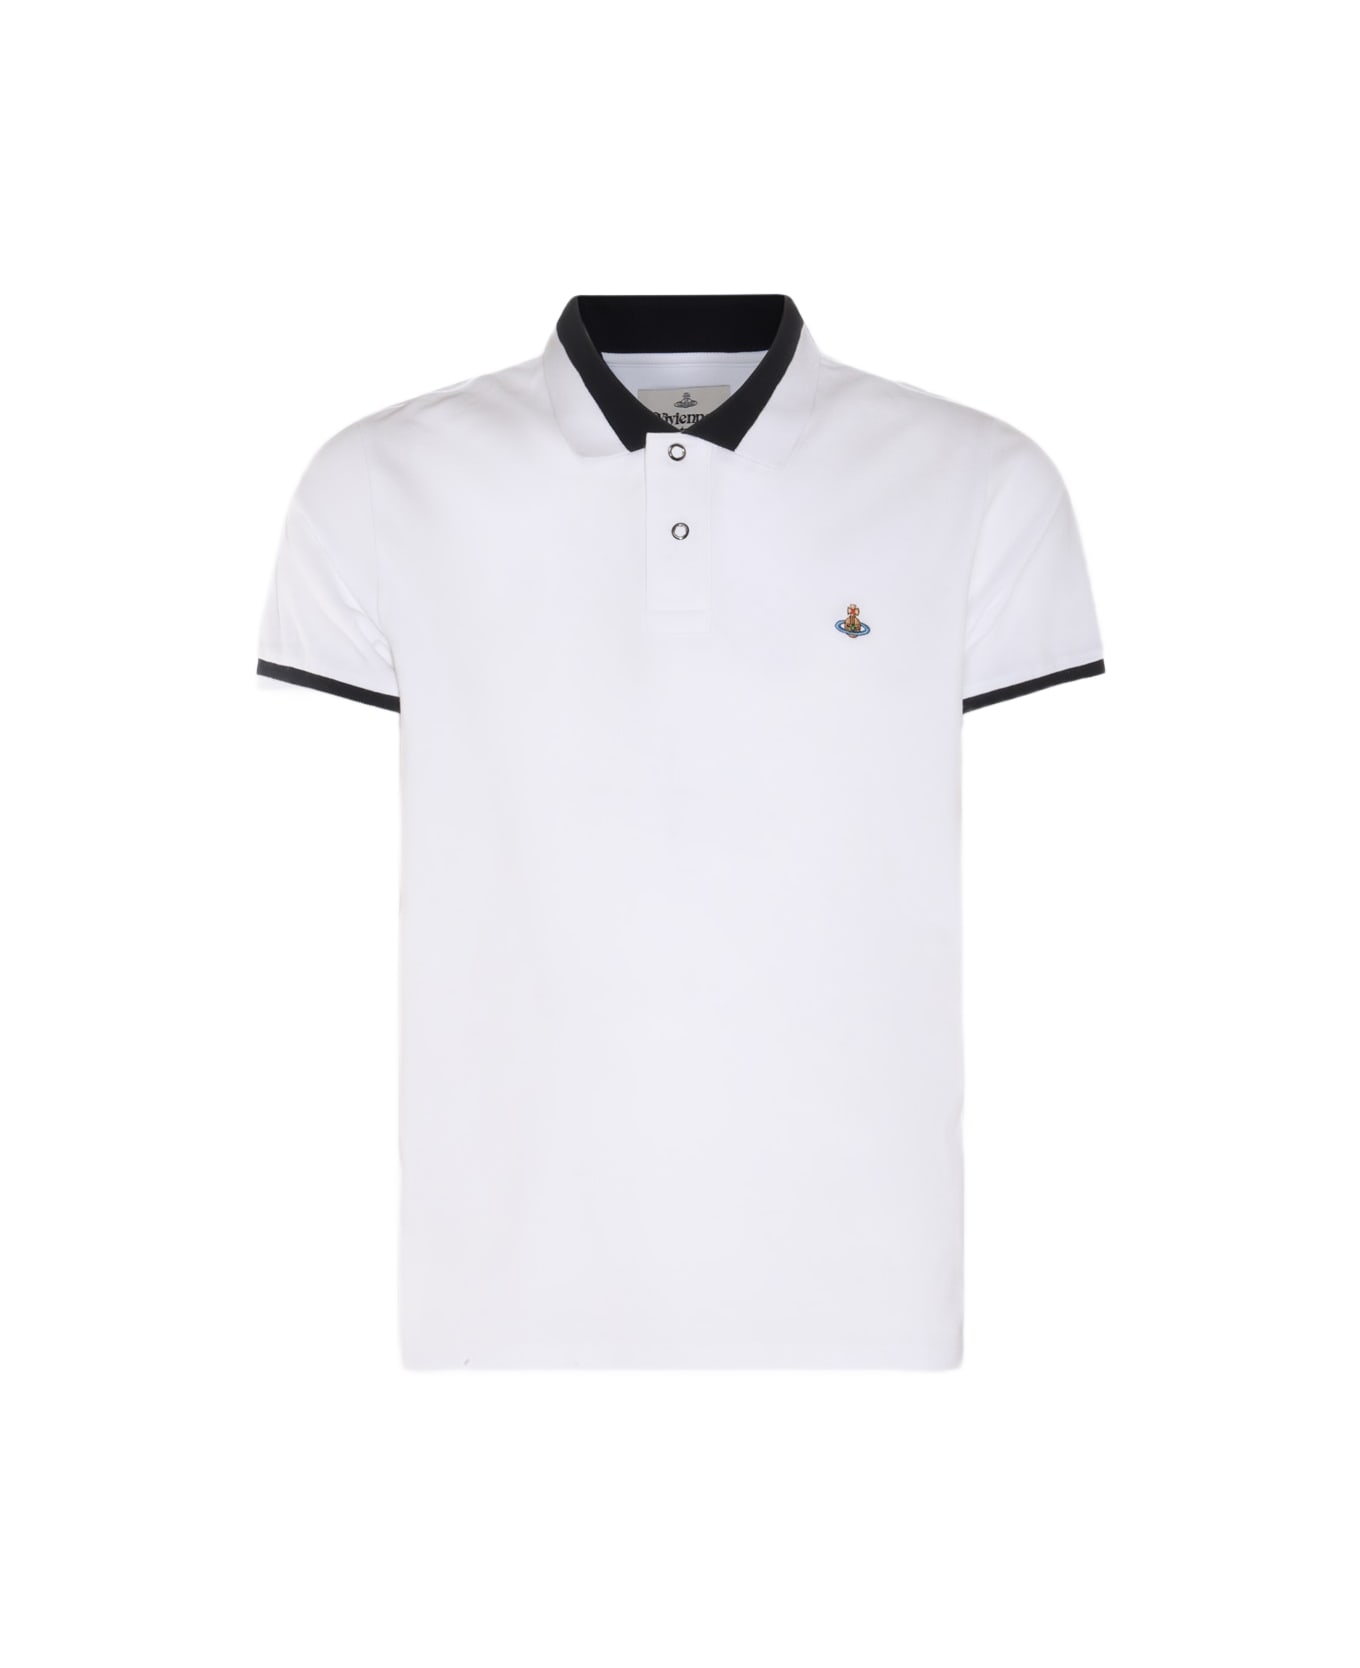 Vivienne Westwood White And Black Cotton Polo Shirt - White ポロシャツ